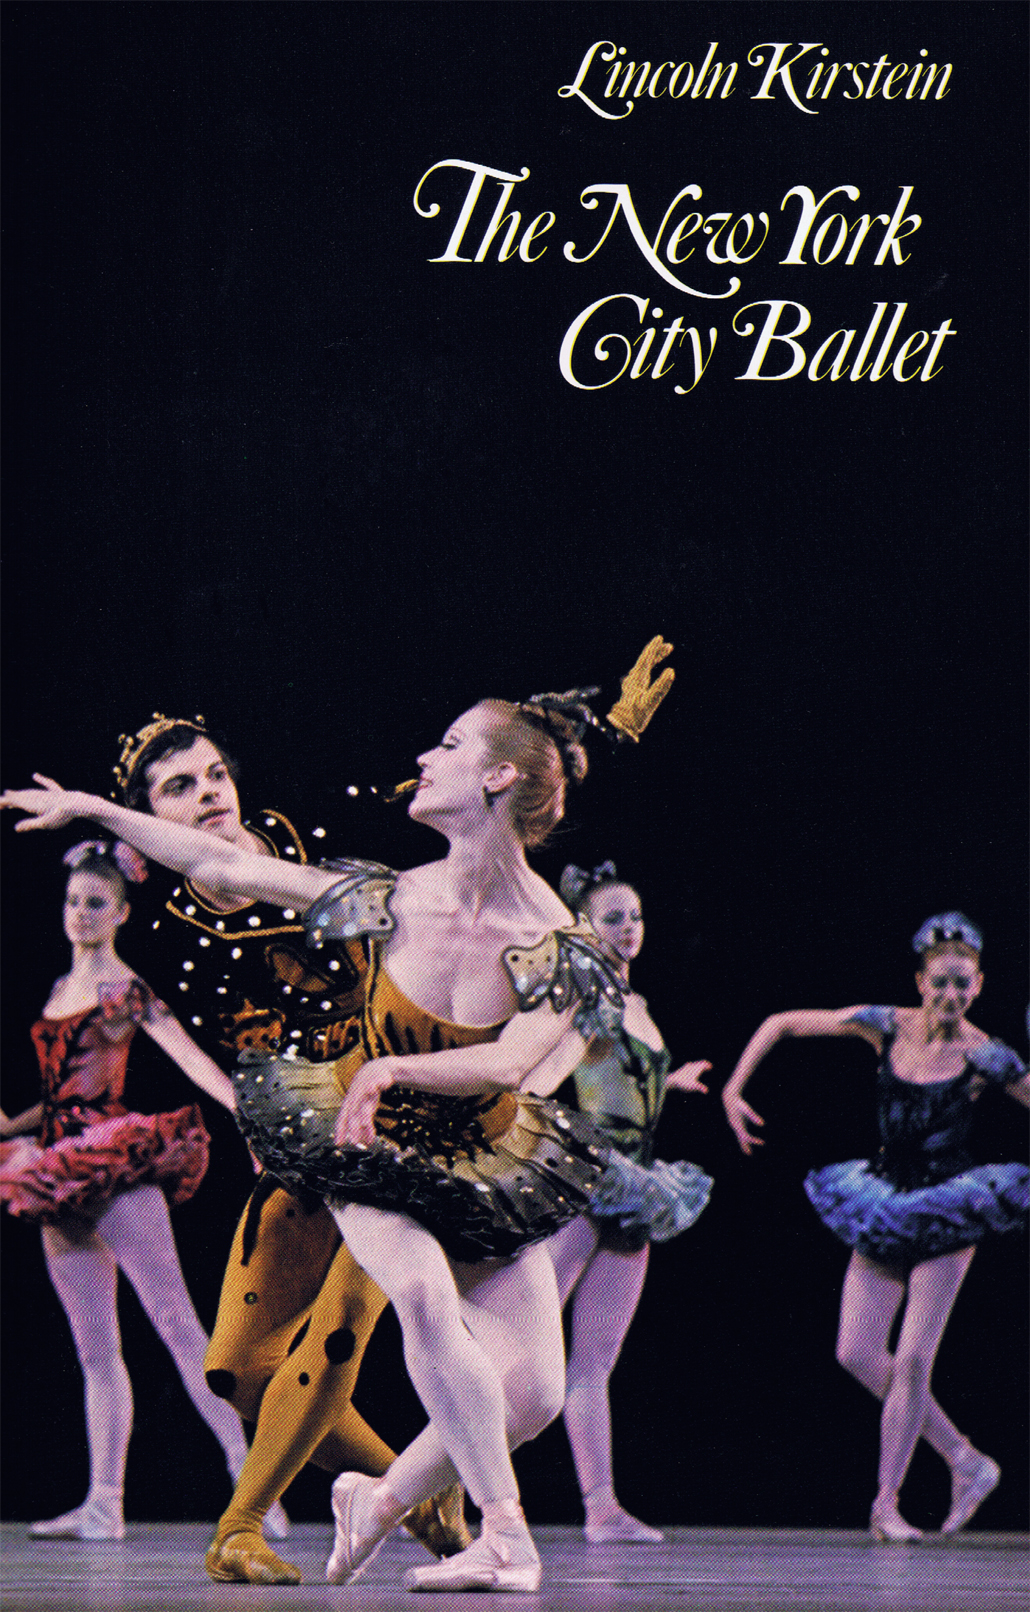 Me and Linda Yourth on the cover of Lincoln Kirstein's book about the NYC Ballet in the roles Balanchine recreated for us in his revival of DANSES CONCERTANTE for the Stravinsky Festival (the 1st and most famous one).